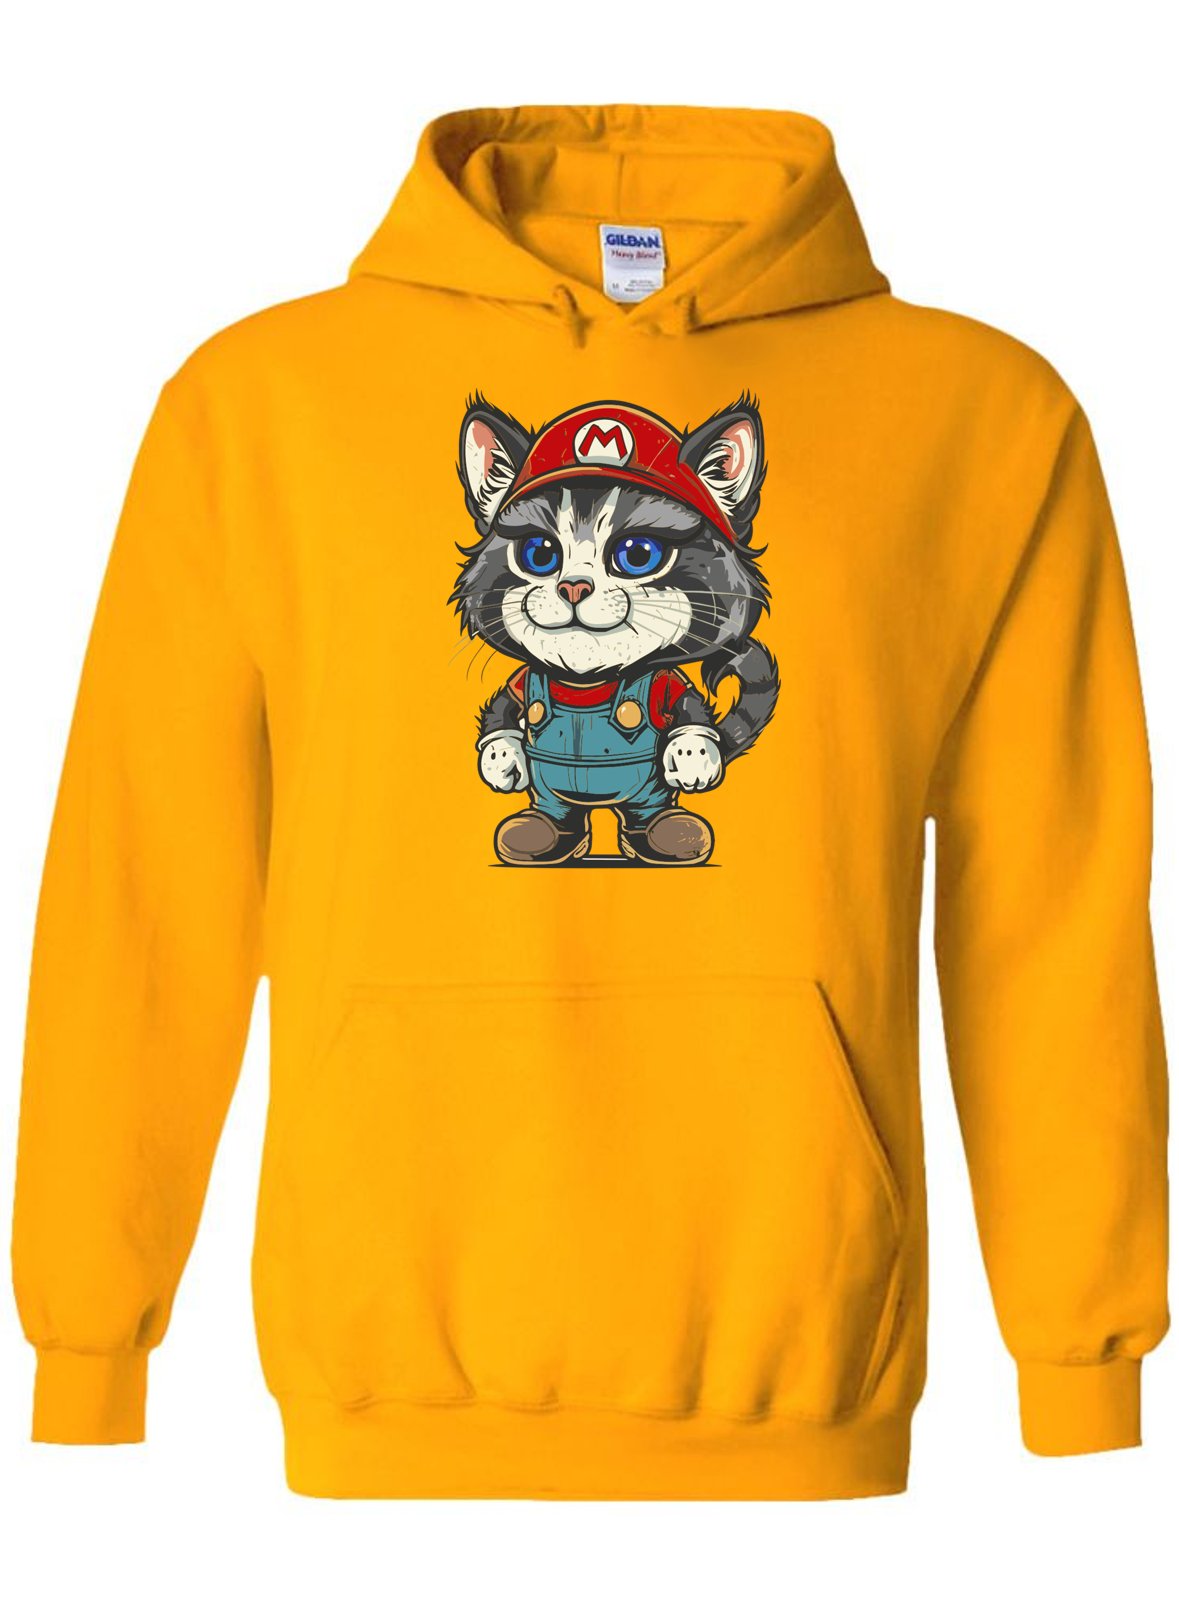 Exclusive Cat Super Mario Inspired Hoodie - Embrace Retro Gaming Style! -